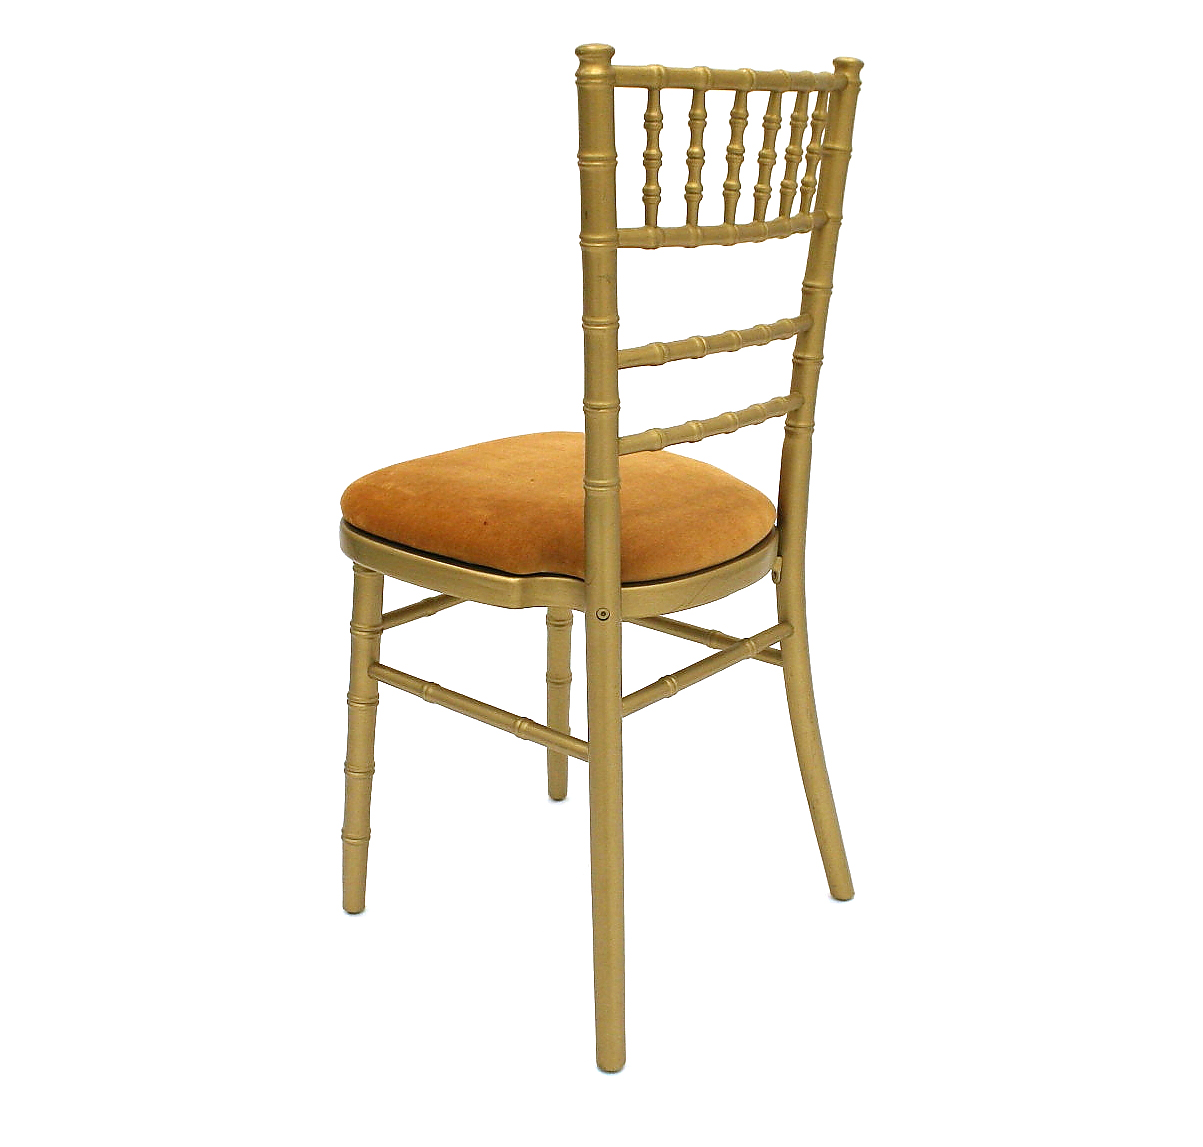 Gold wooden framed chiavari chair with a gold seat pad - BE Event Hire